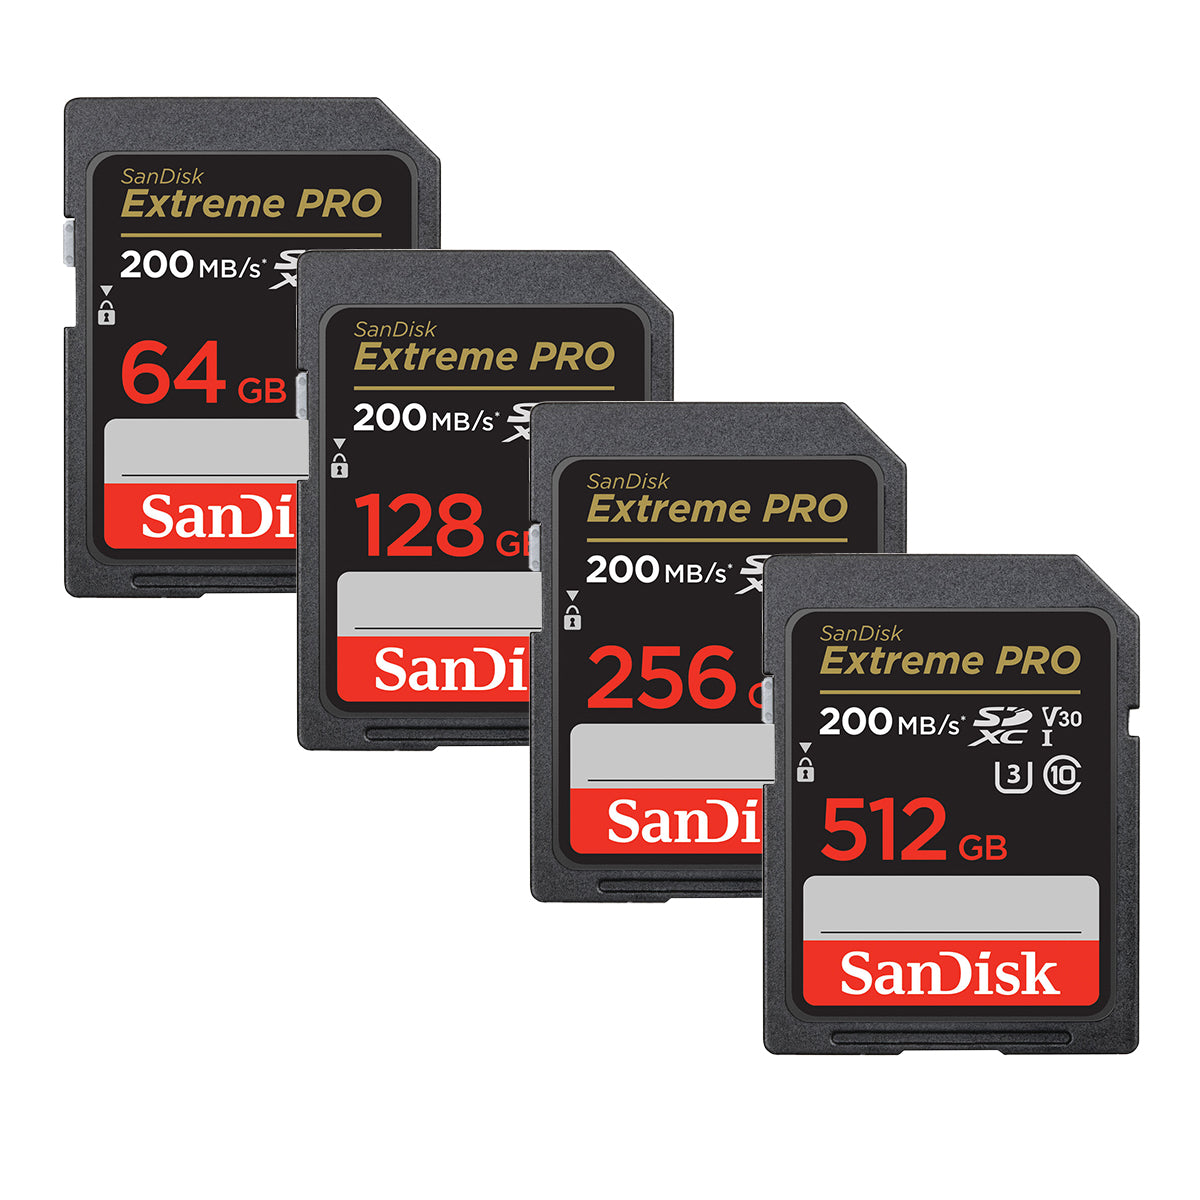 SanDisk Extreme Pro SD Card UHS-I SDXC Class 10 with 200MB/s Read Spee